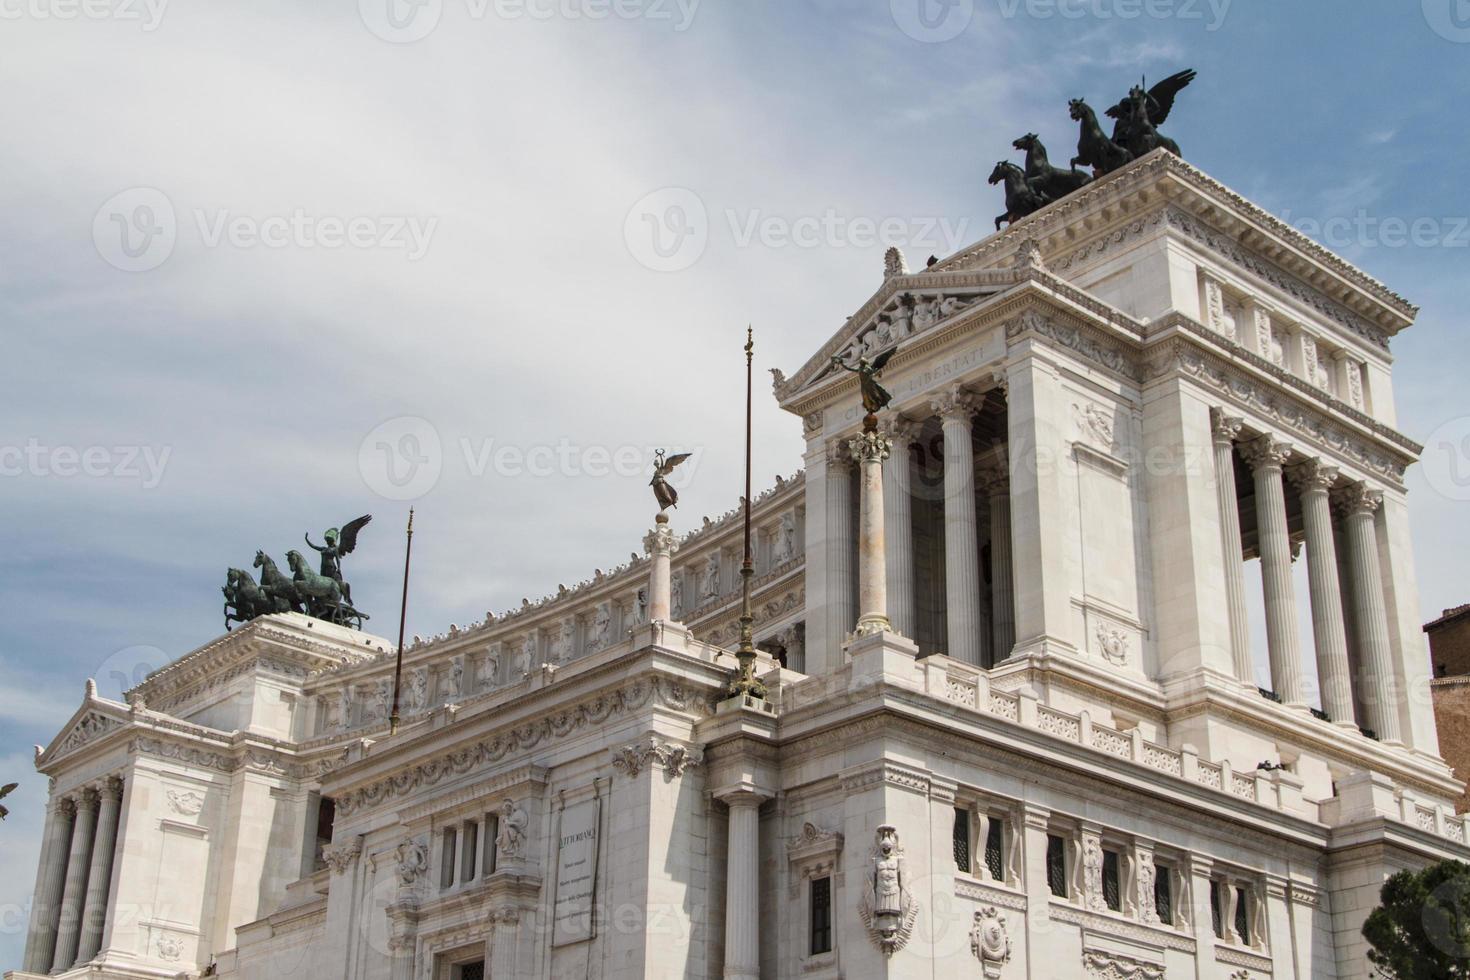 Equestrian monument to Victor Emmanuel II near Vittoriano at day in Rome, Italy photo